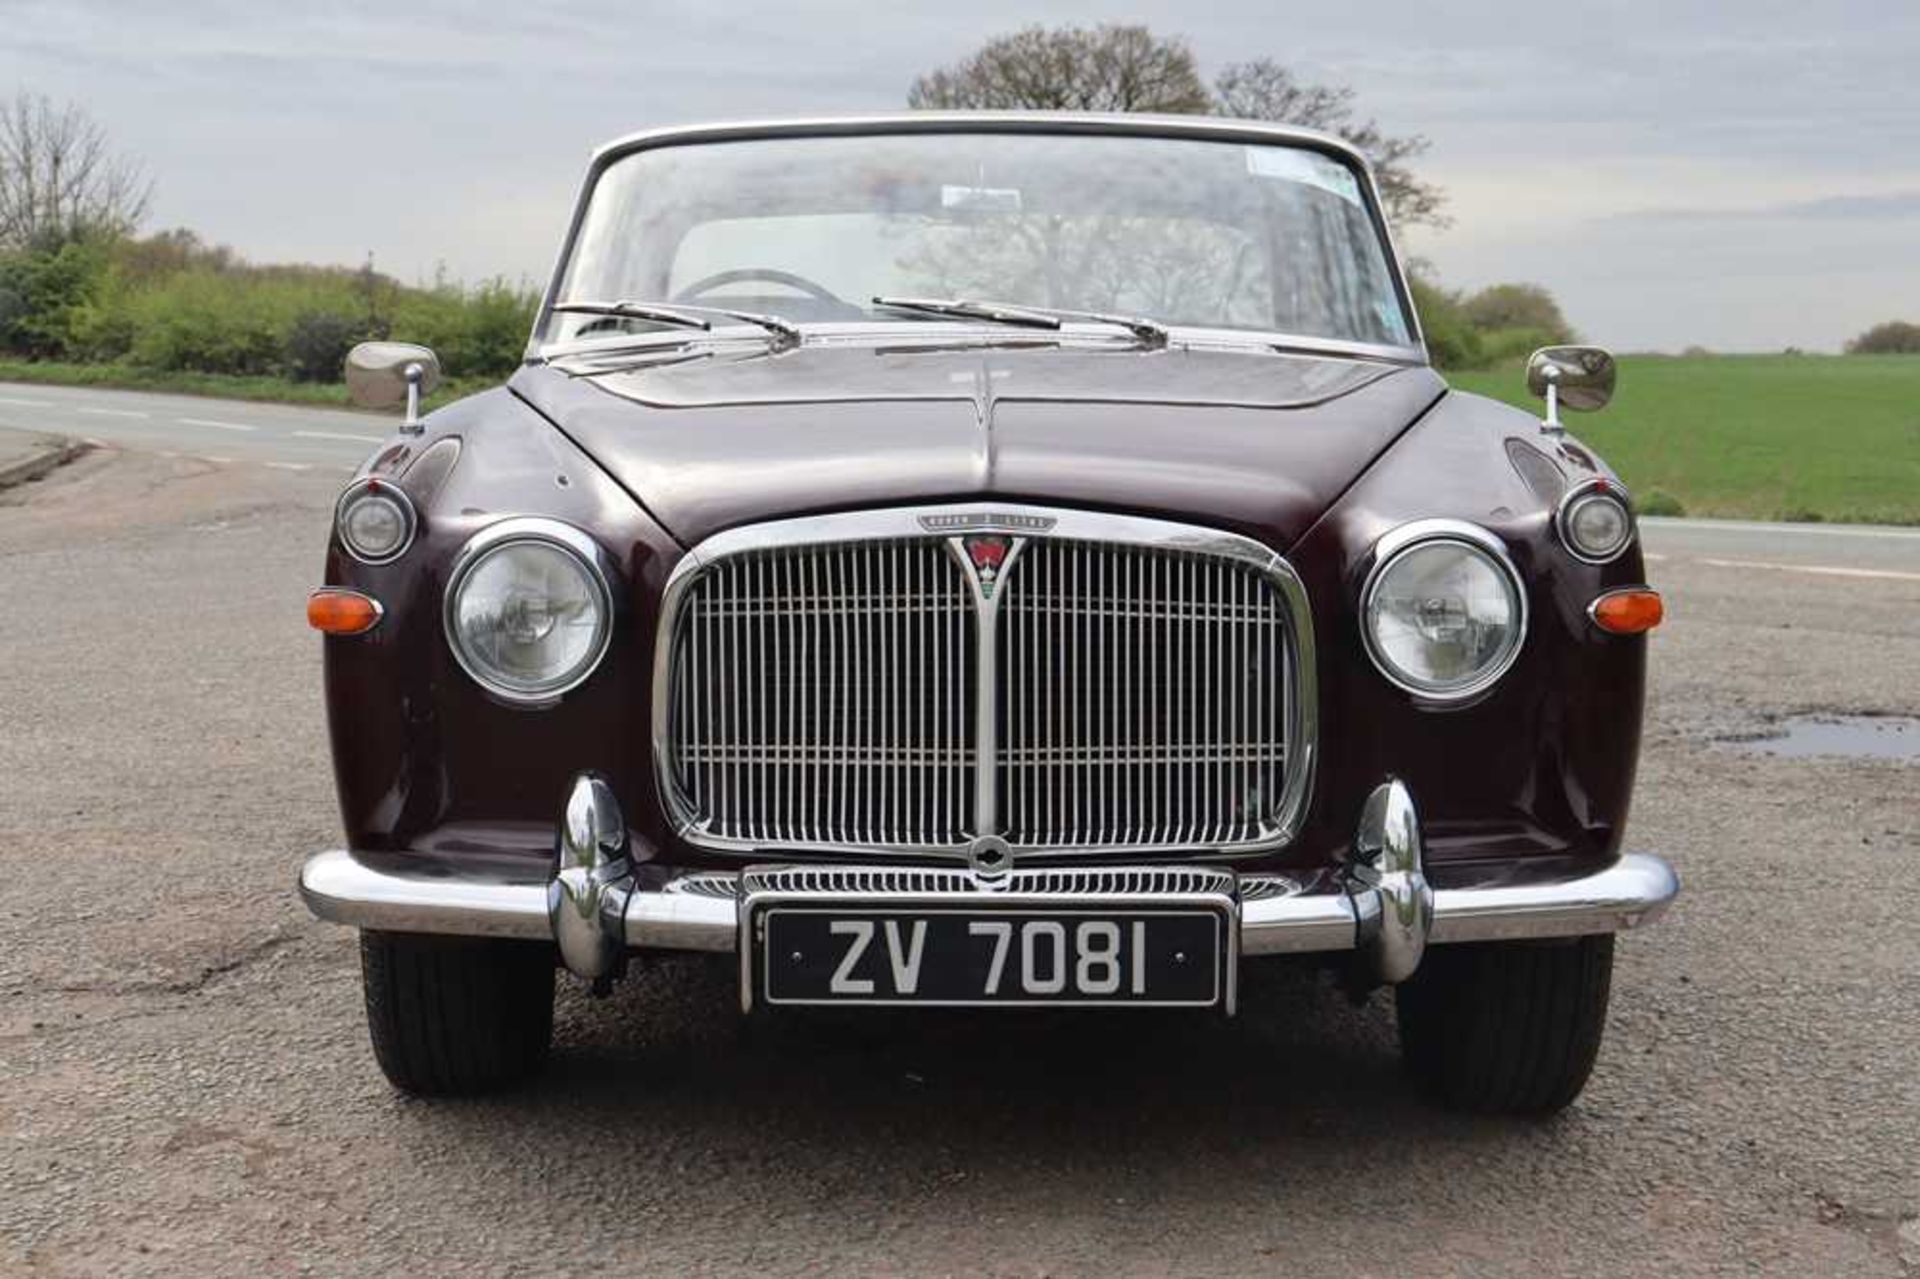 1964 Rover P5 3-Litre Coupe - Image 6 of 41